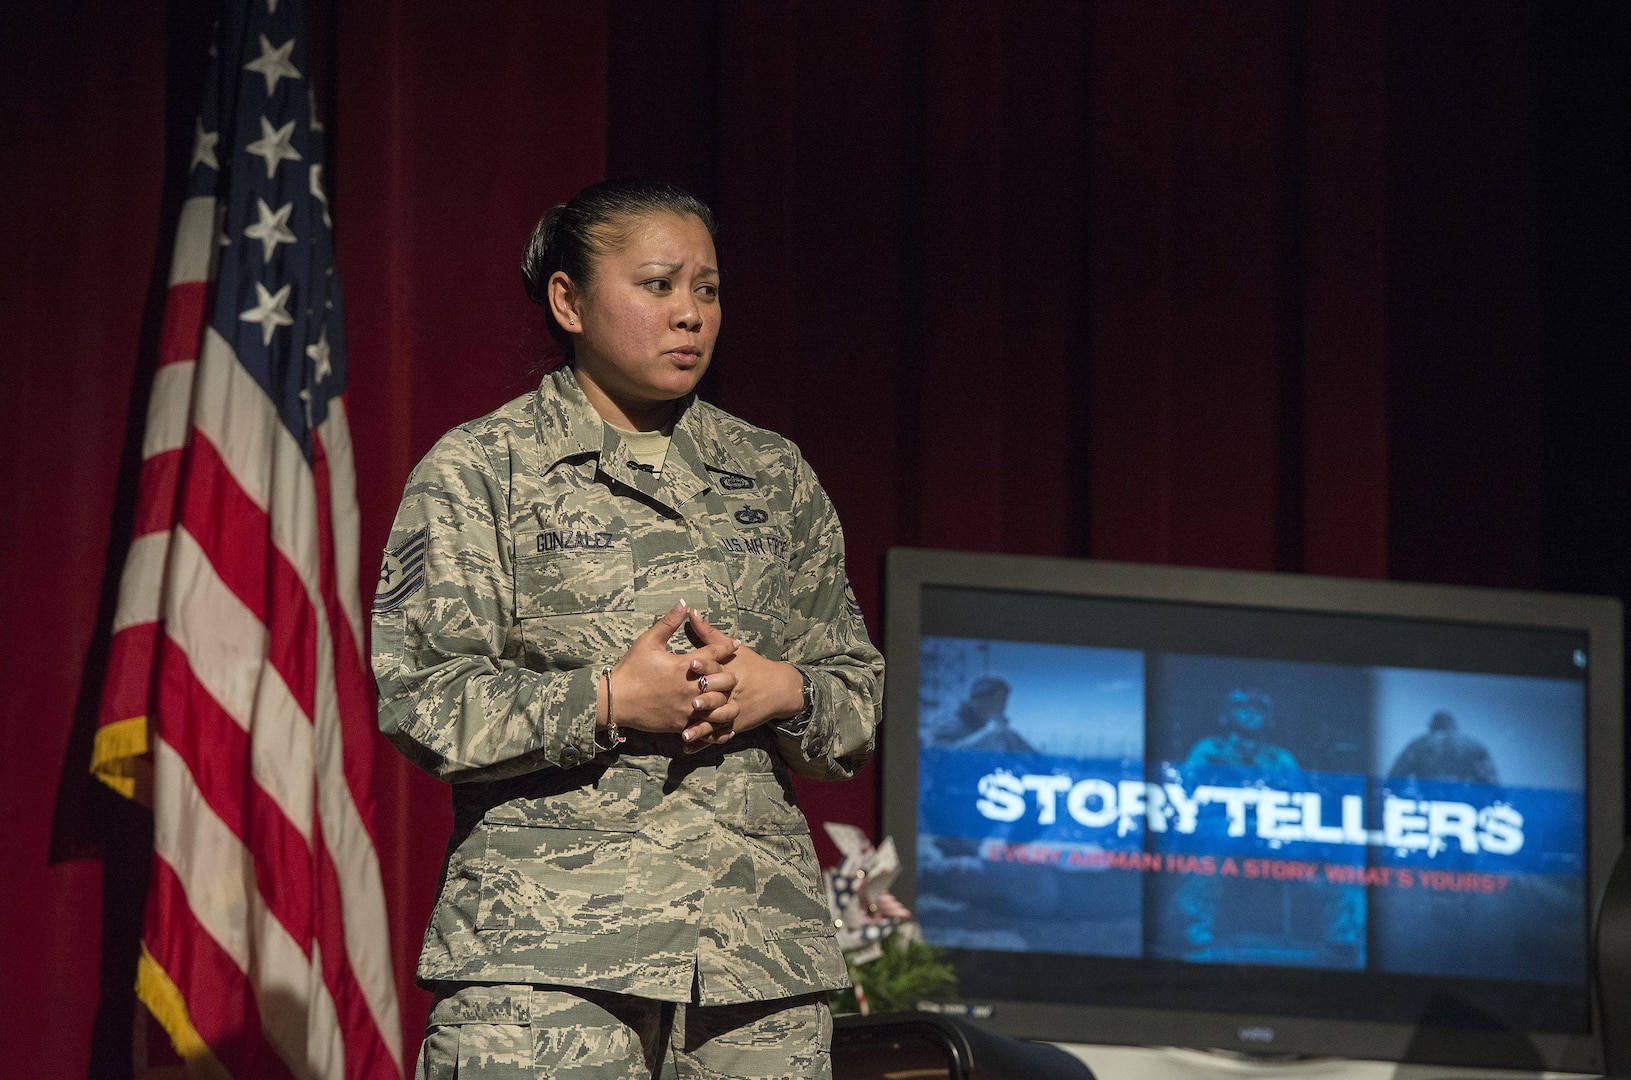 Tech. Sgt. Margie Gonzalez, 93rd IS intelligence analyst, shares her life experiences Jan. 19, 2016, at Arnold Hall at Joint Base San Antonio-Lackland, Texas. The “Storytellers” event was created to provide a forum where Airmen can share experiences and learn about one another promoting understanding throughout the force. (U.S. Air Force photo by Johnny Saldivar/Released)